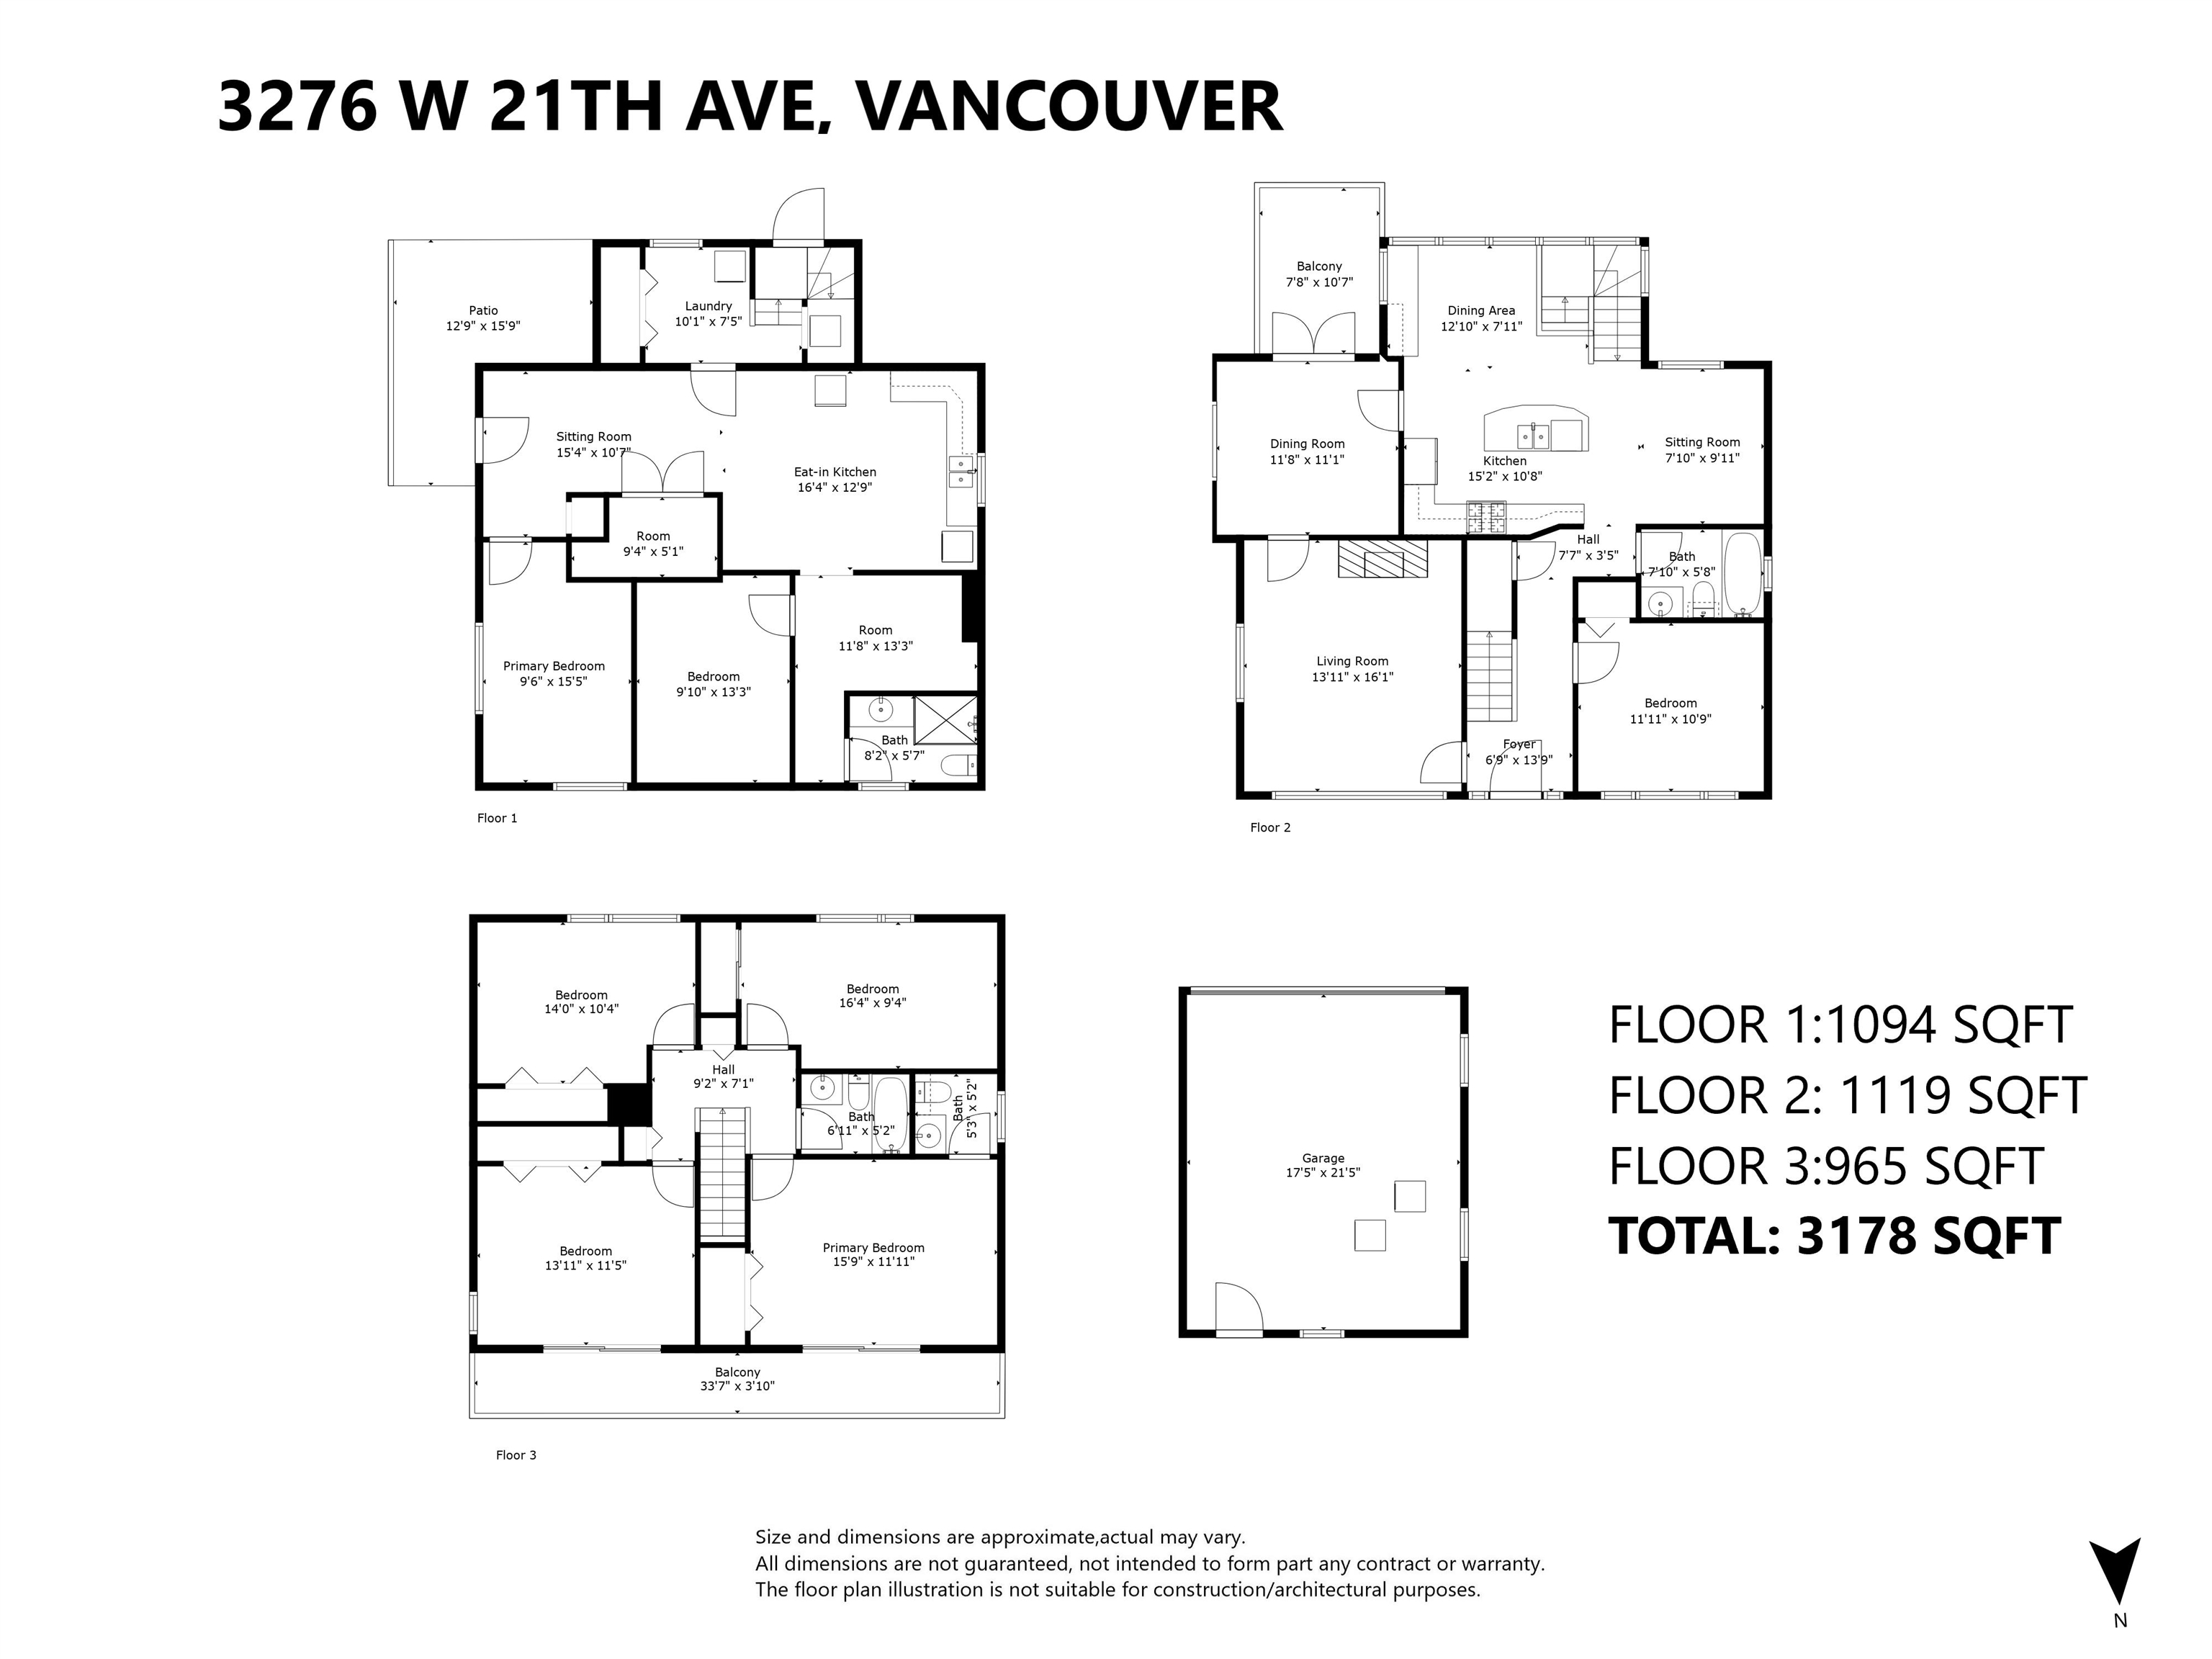 Listing image of 3276 W 21ST AVENUE